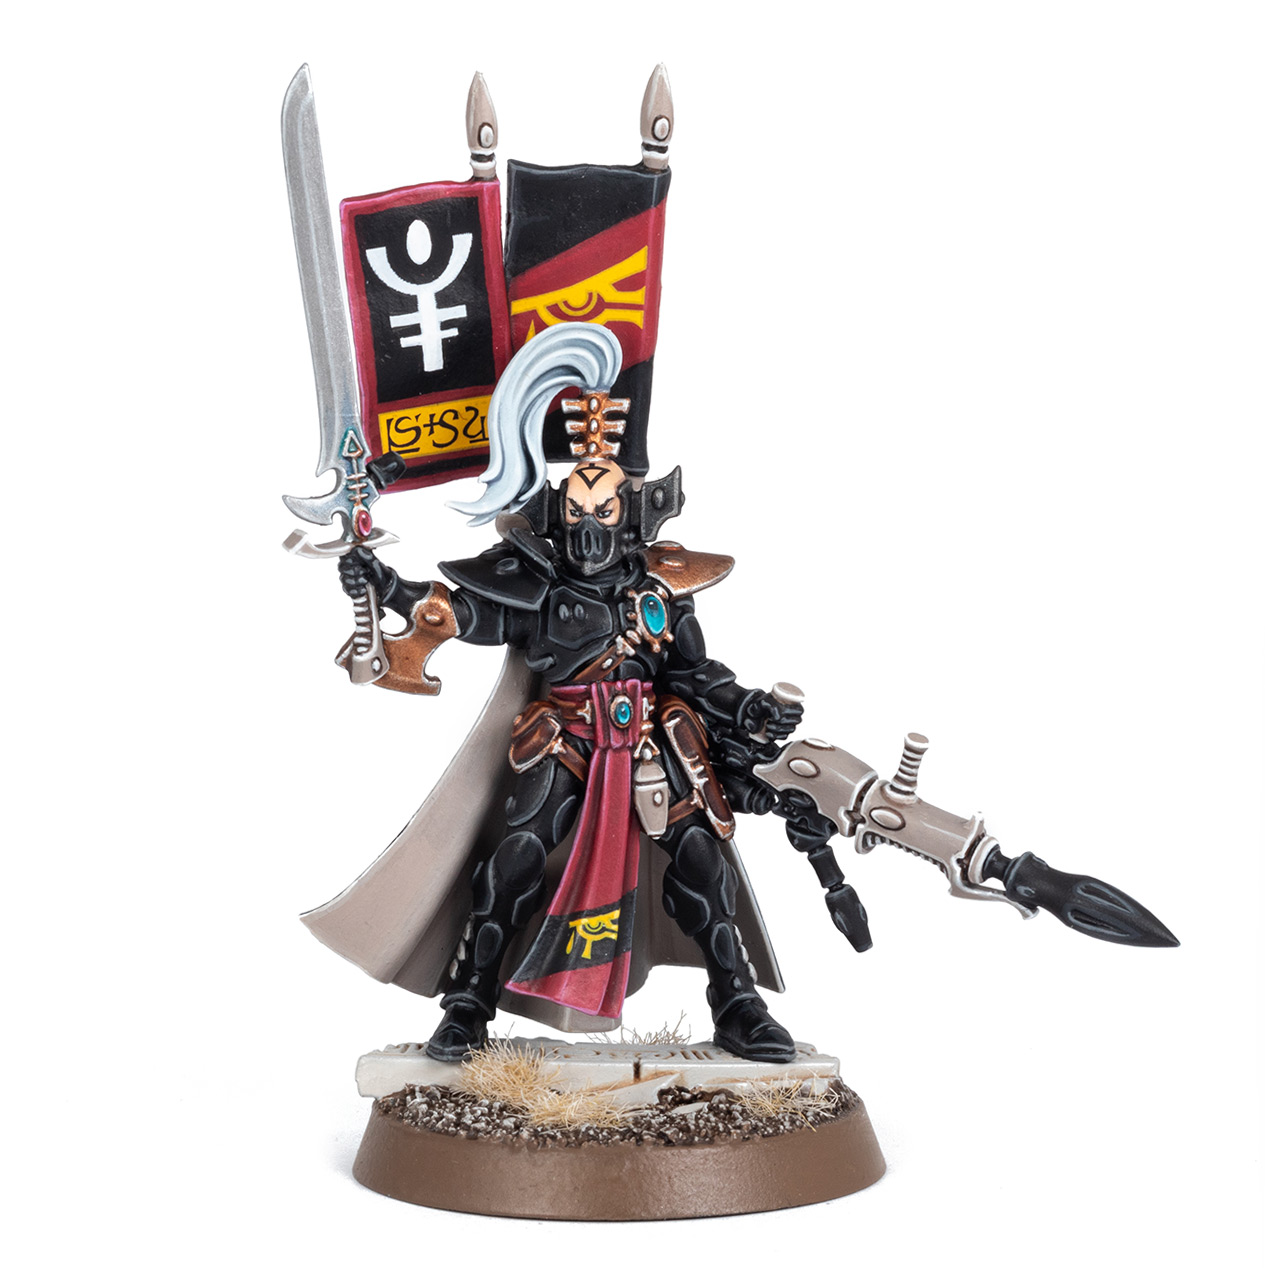 Front of an Eldar Autarch of Ulthwé, painted by Stahly